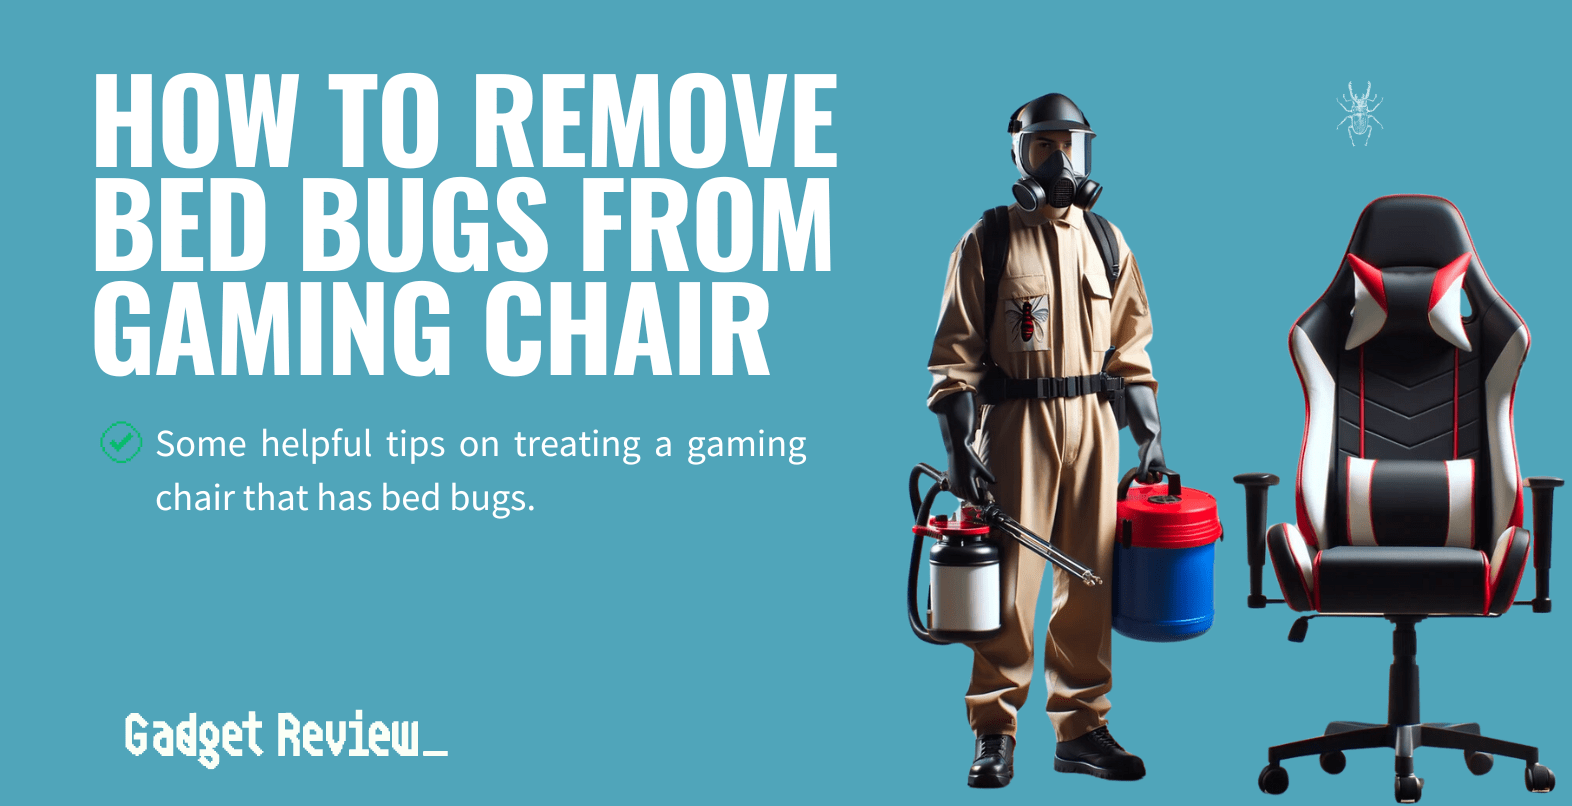 How to Remove Bed Bugs From a Gaming Chair